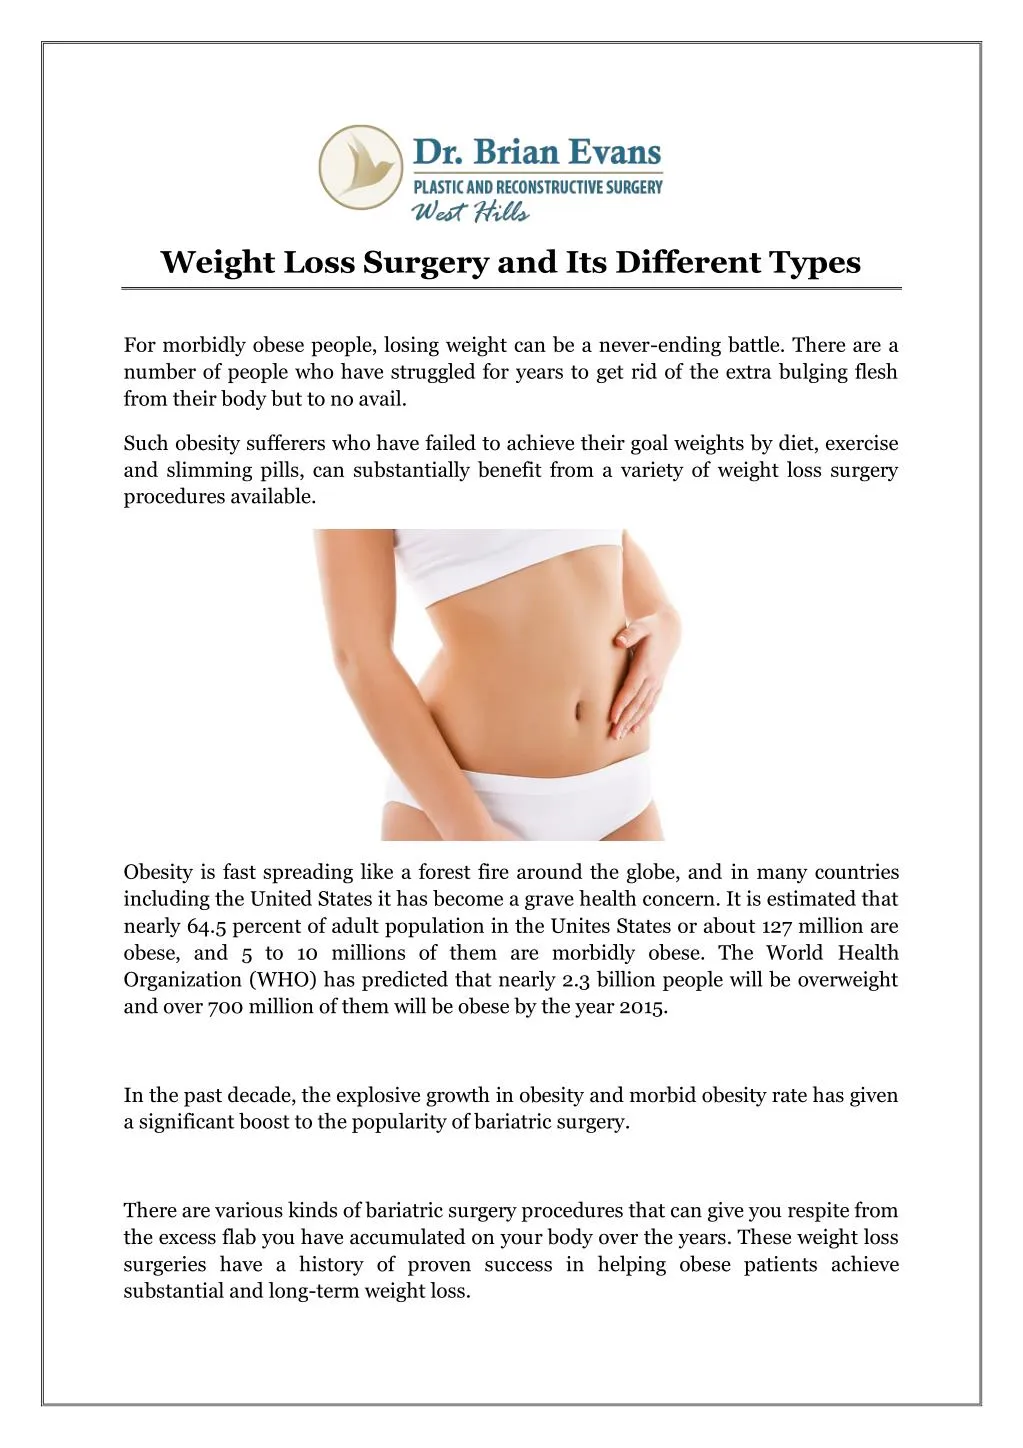 weight loss surgery and its different types